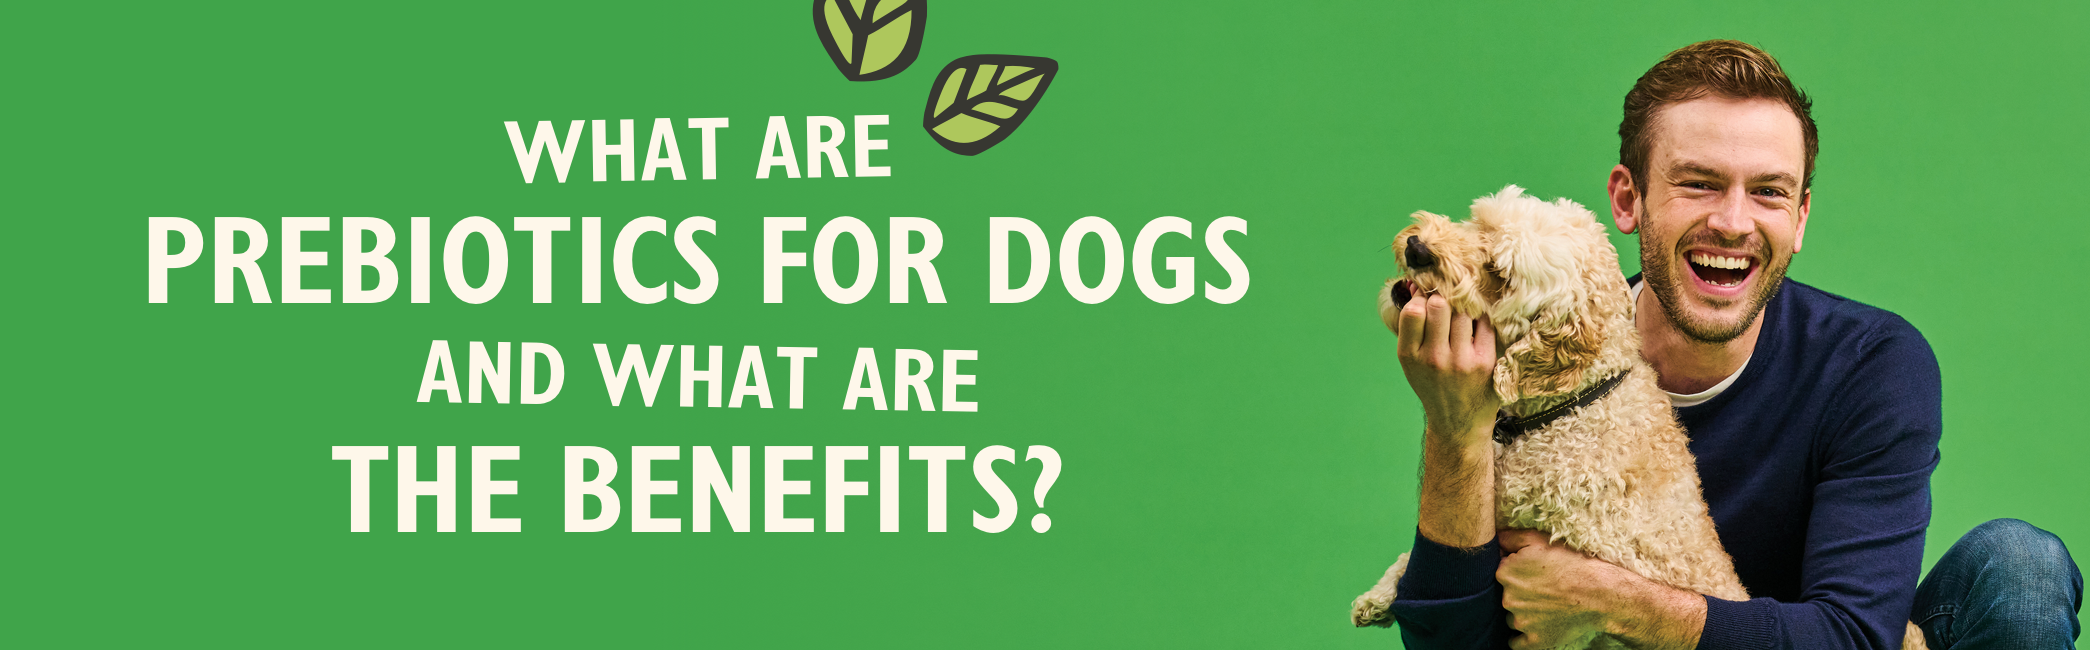 What Are Prebiotics For Dogs And What Are The Benefits with Rory the Vet